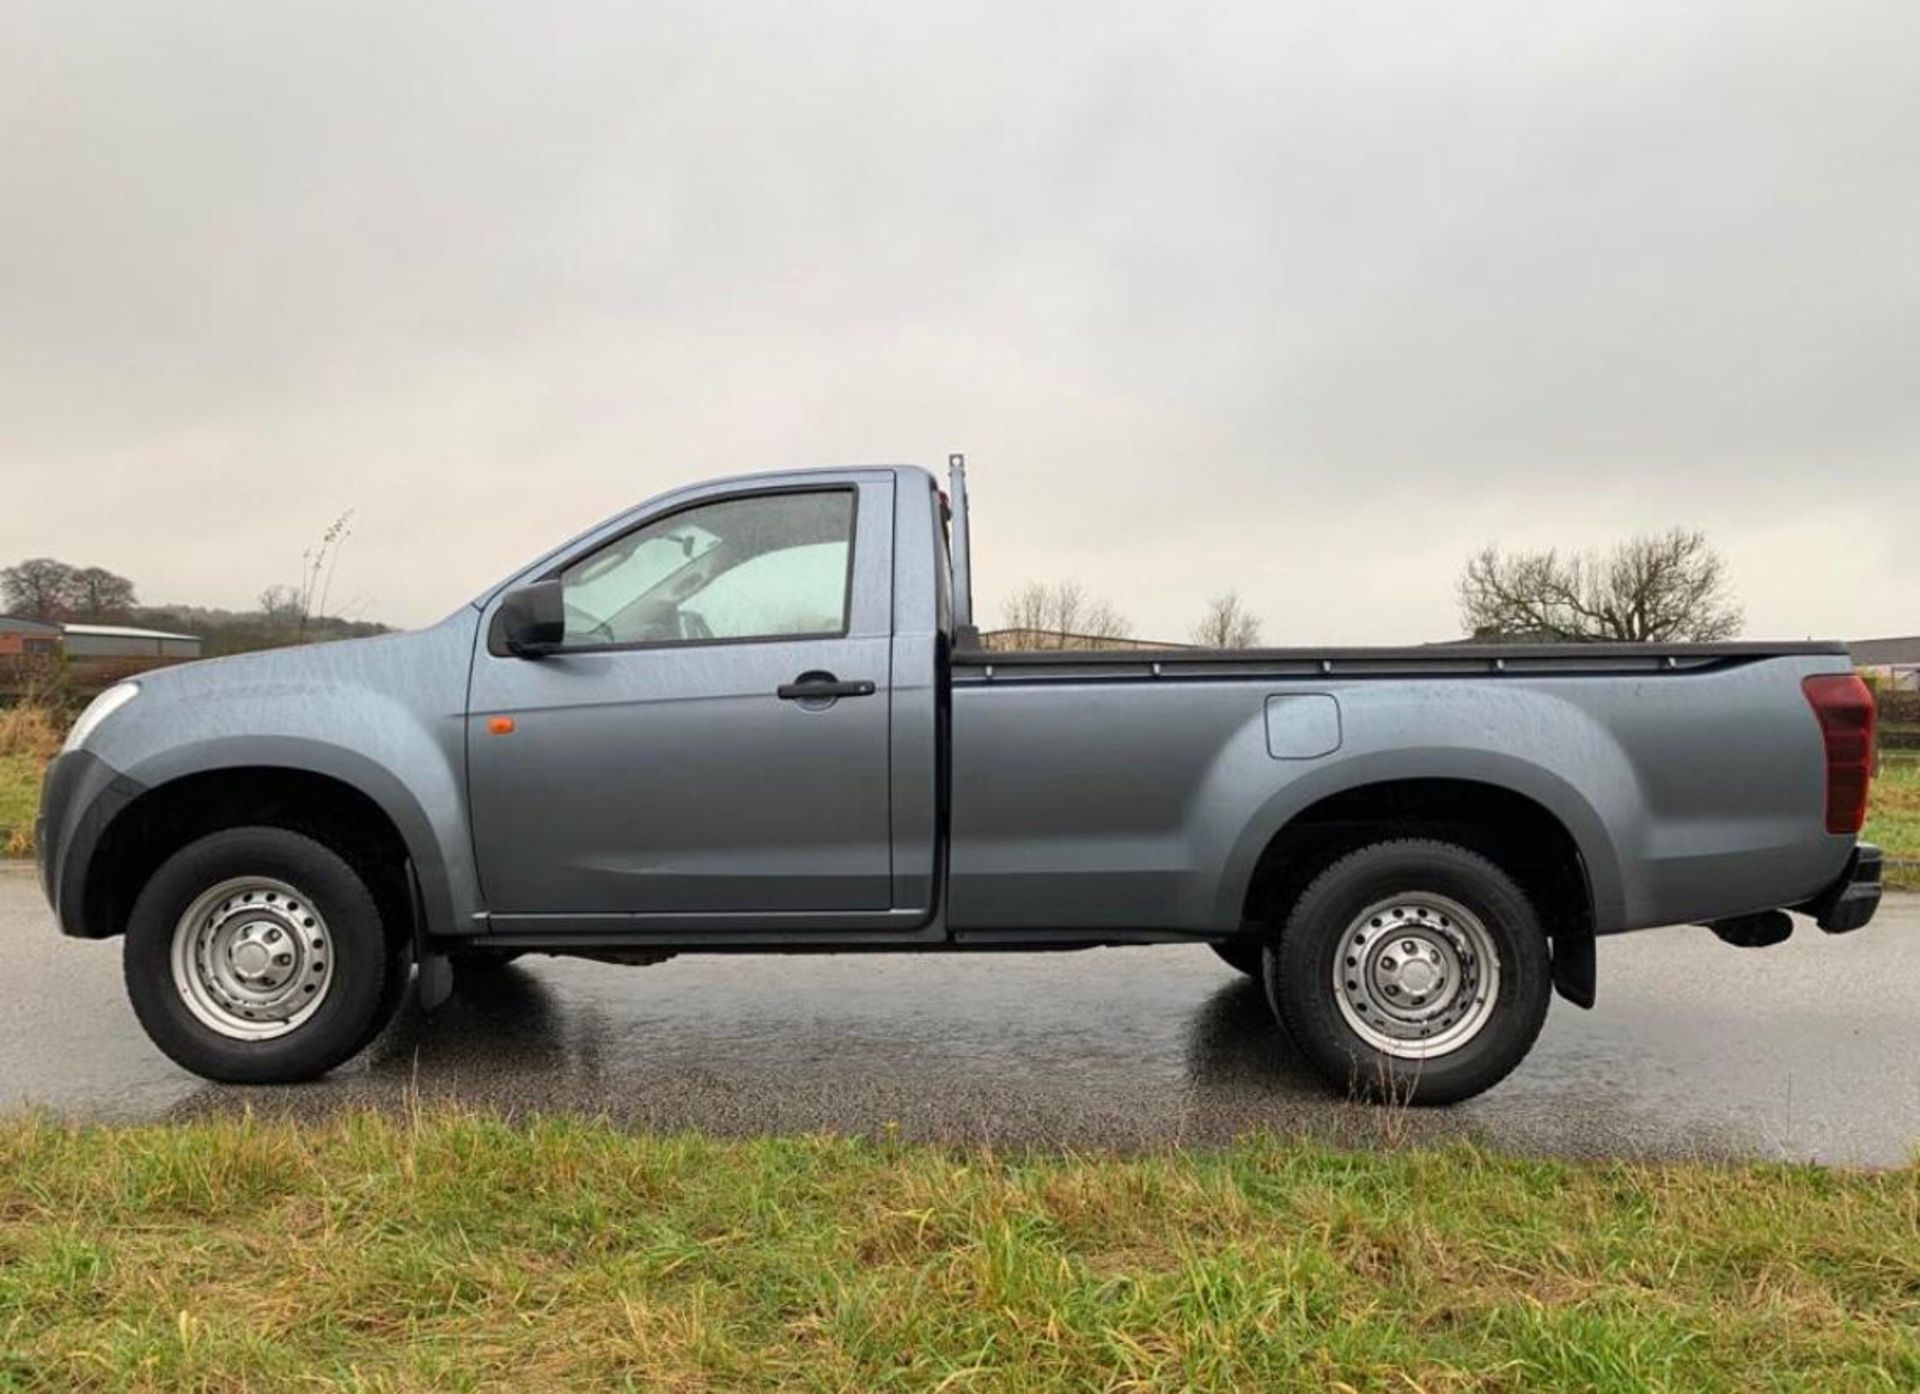 2015/15 REG ISUZU D-MAX S/C TWIN TURBO 4X4 TD 2.5 DIESEL PICK-UP, SHOWING 0 FORMER KEEPERS *NO VAT* - Image 2 of 10